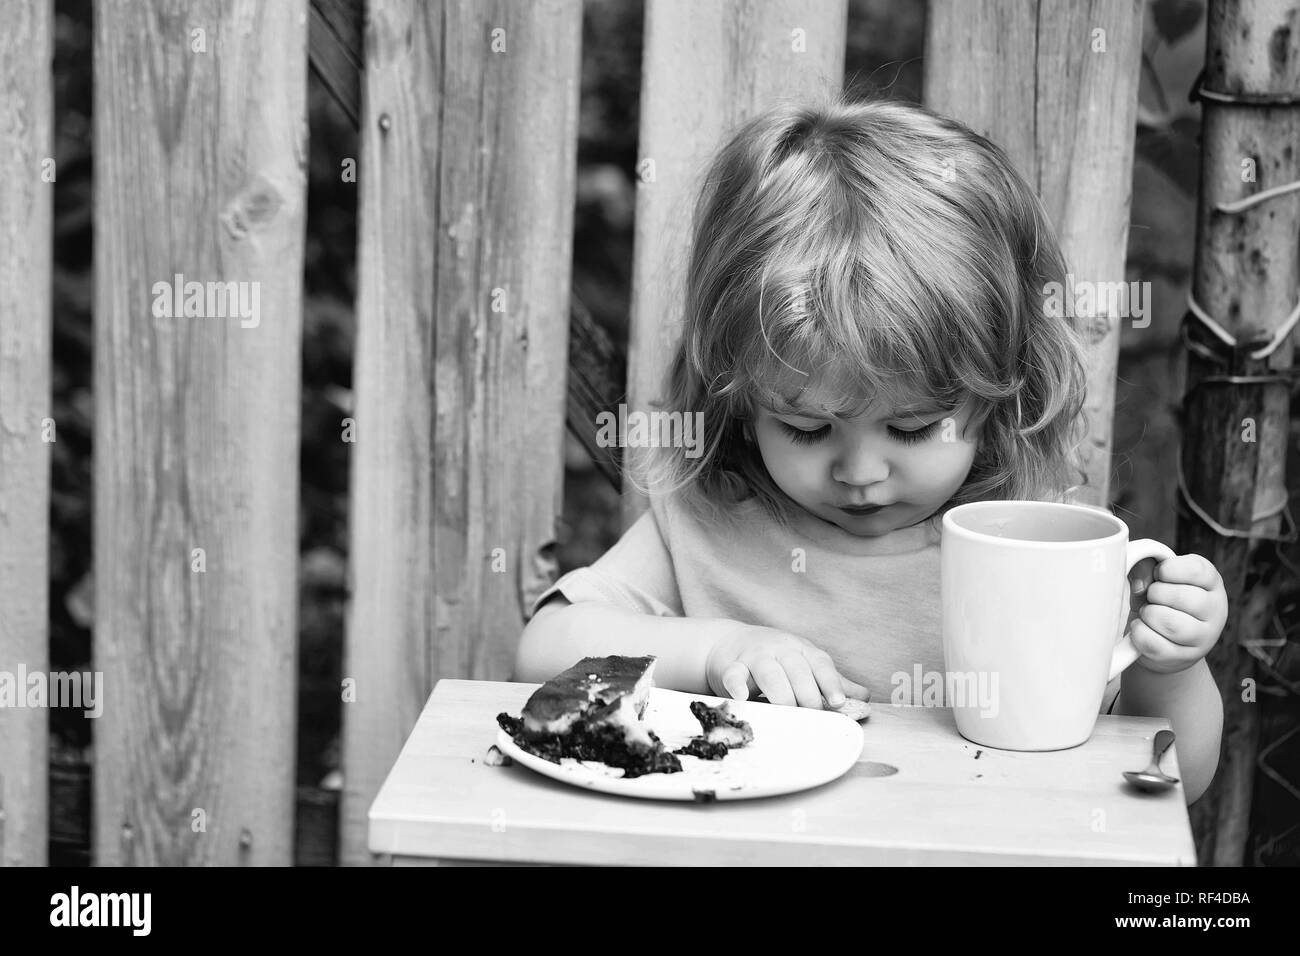 small boy eating pie near wooden fence Stock Photo